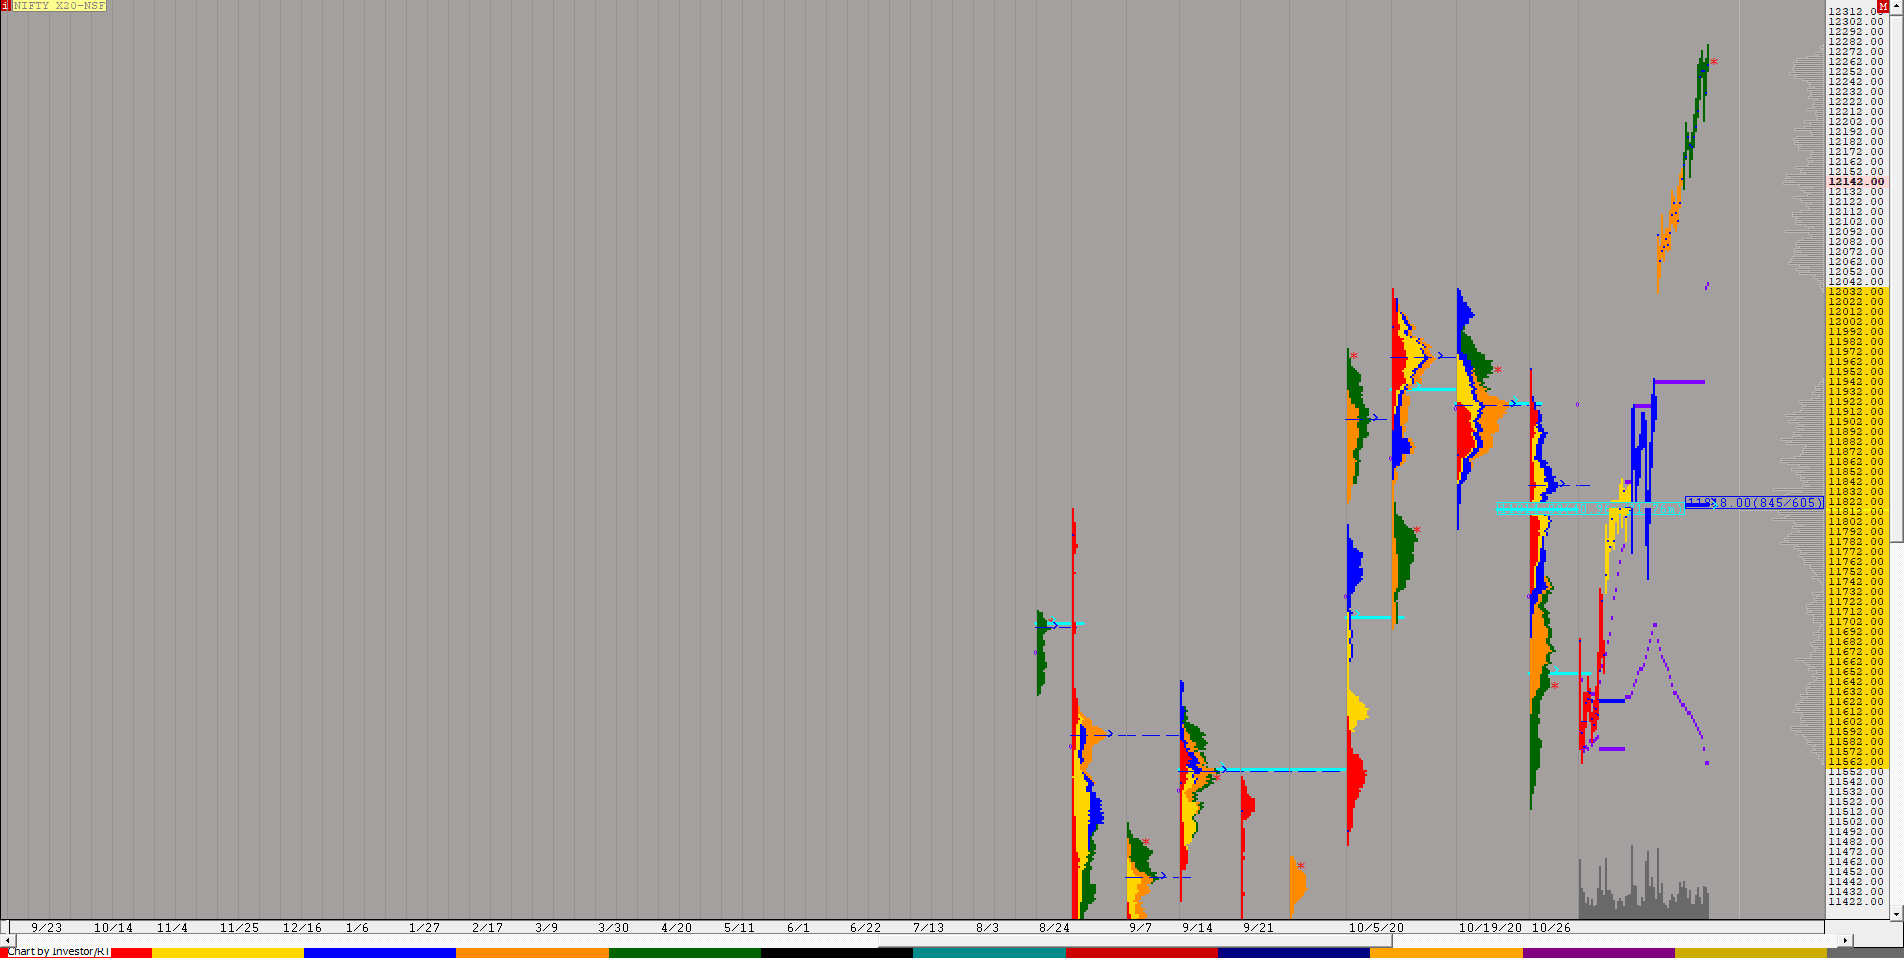 Nf F 1 Weekly Charts (02Nd To 06Th November 2020) And Market Profile Analysis Banknifty Futures, Charts, Day Trading, Intraday Trading, Intraday Trading Strategies, Market Profile, Market Profile Trading Strategies, Nifty Futures, Order Flow Analysis, Support And Resistance, Technical Analysis